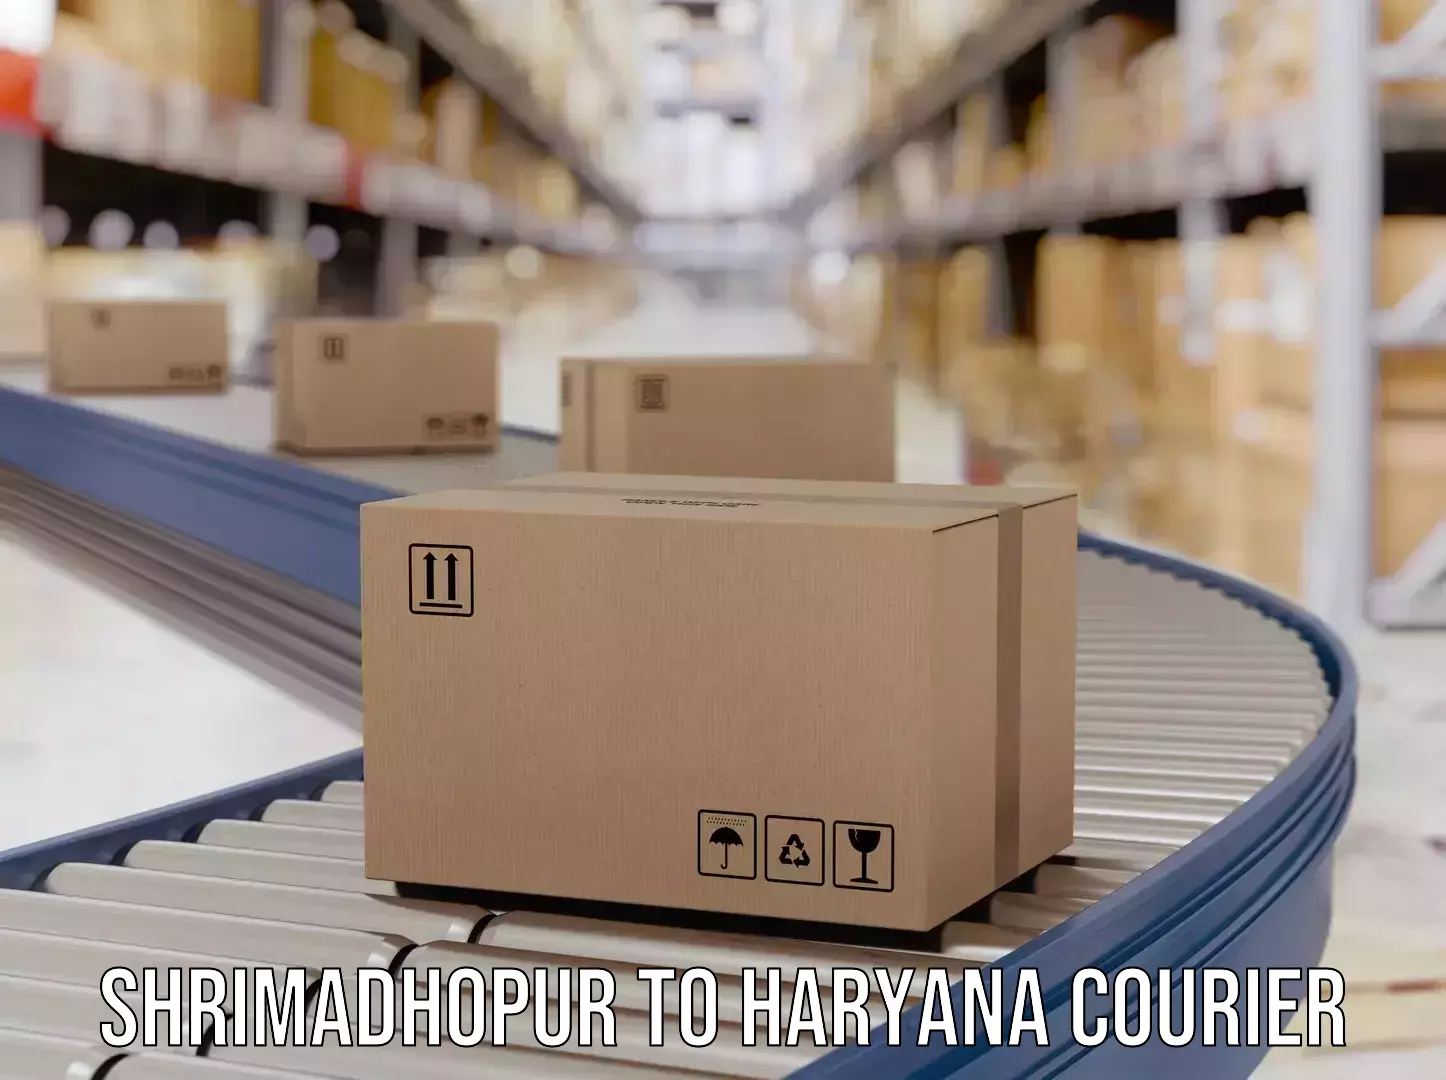 Supply chain delivery in Shrimadhopur to Haryana